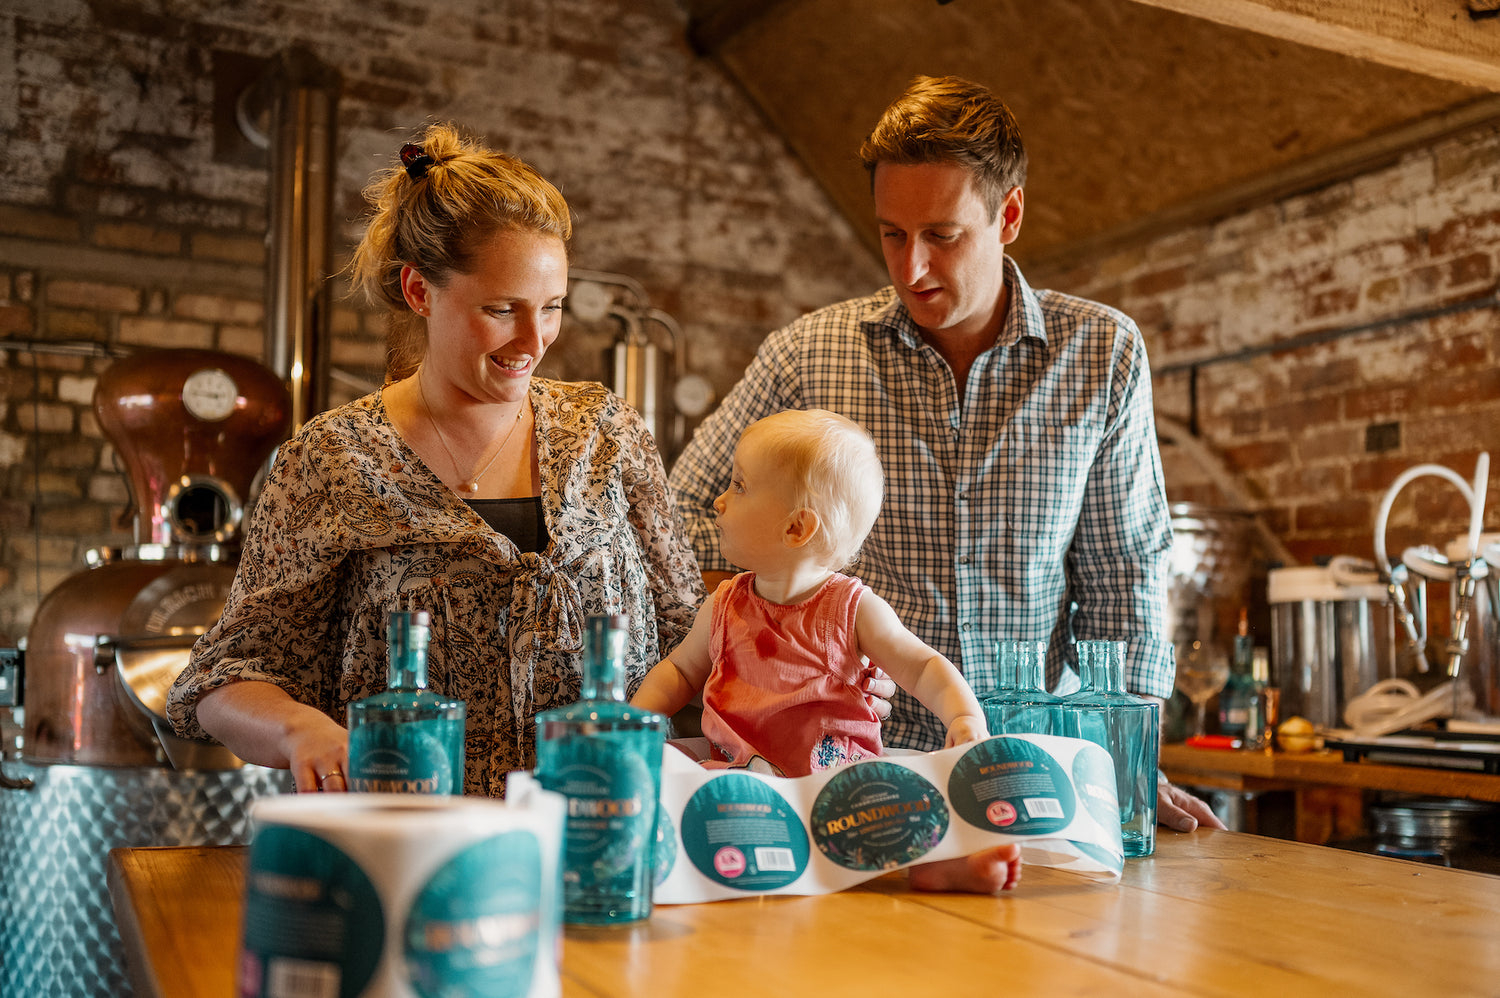 Roundwood Family - Emily and Rupert laugh with baby daughter perched on table surrounded by labels